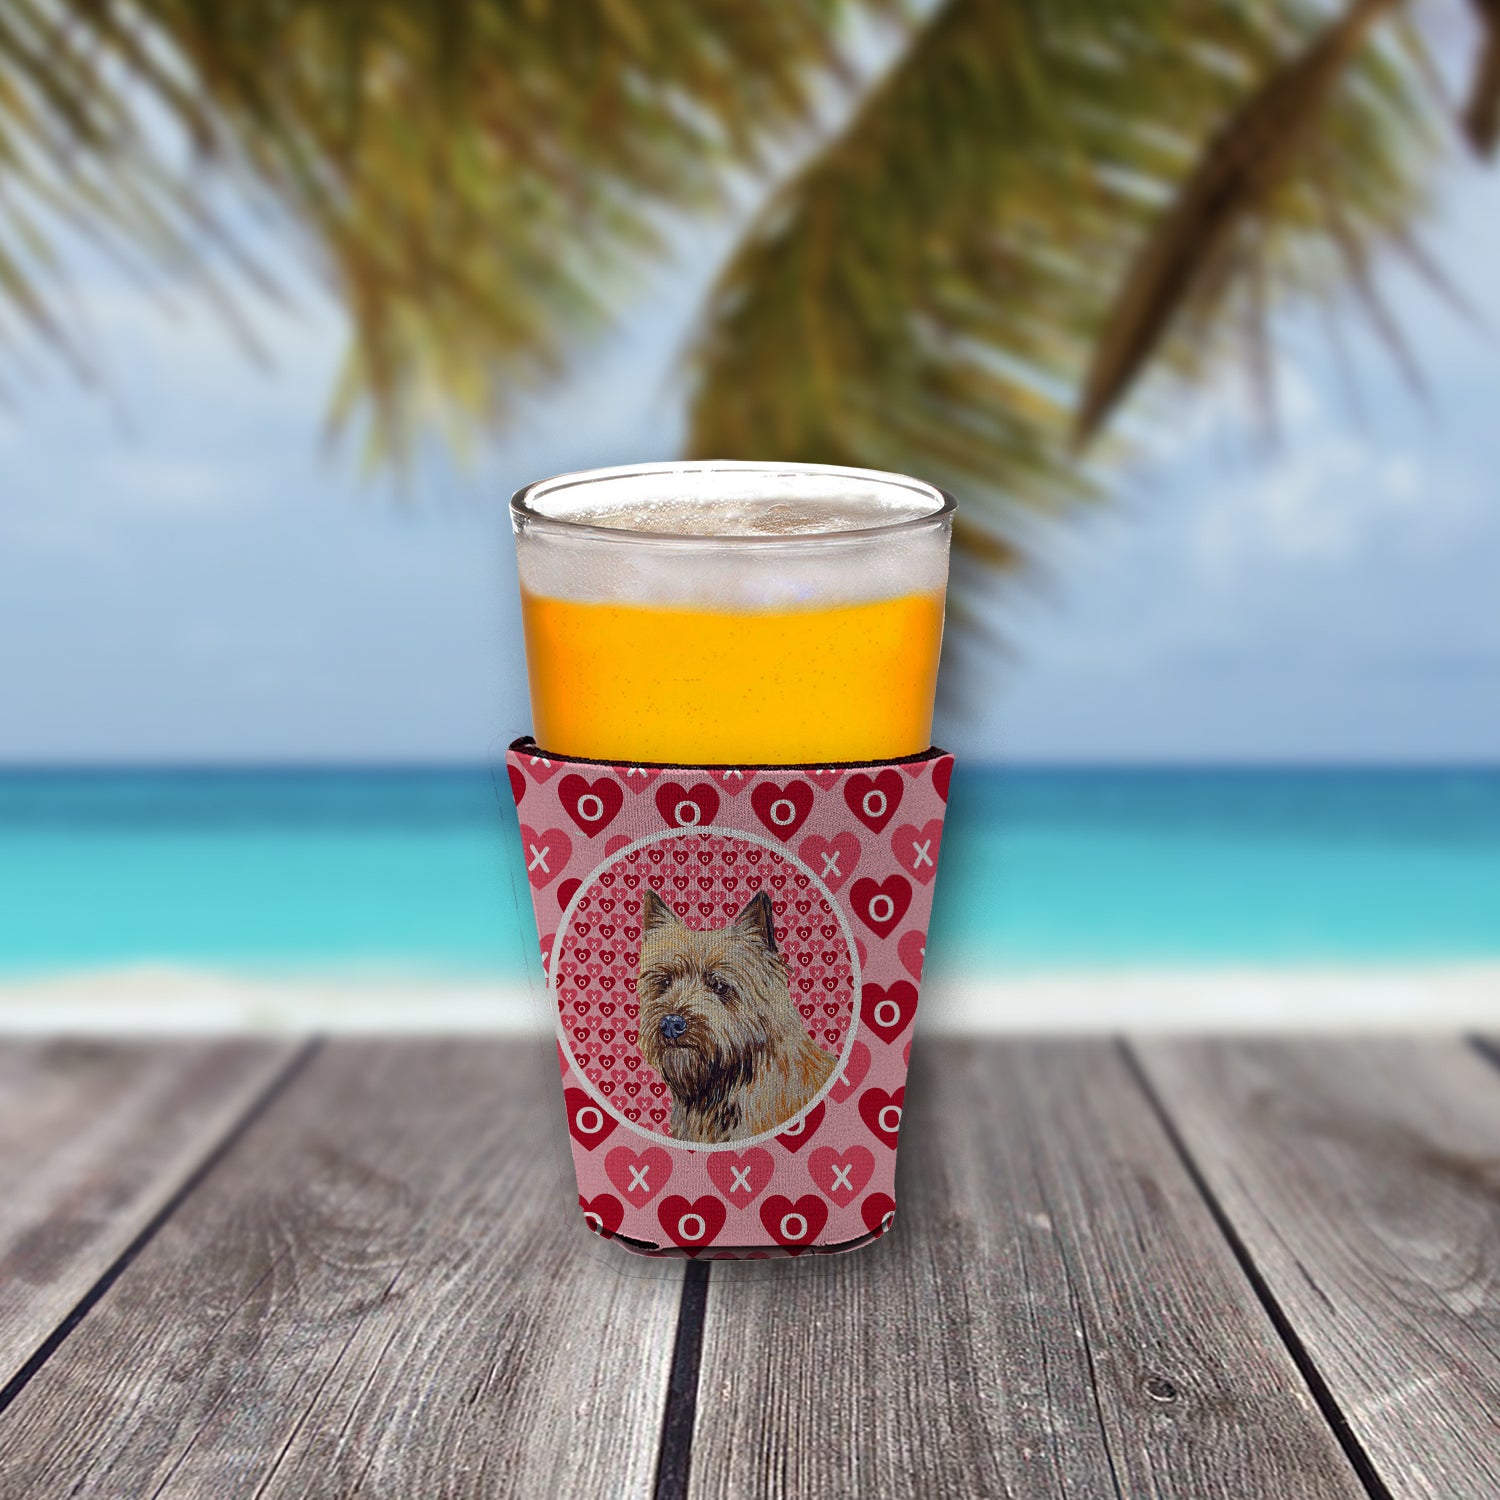 Cairn Terrier Valentine's Love and Hearts Red Cup Beverage Insulator Hugger